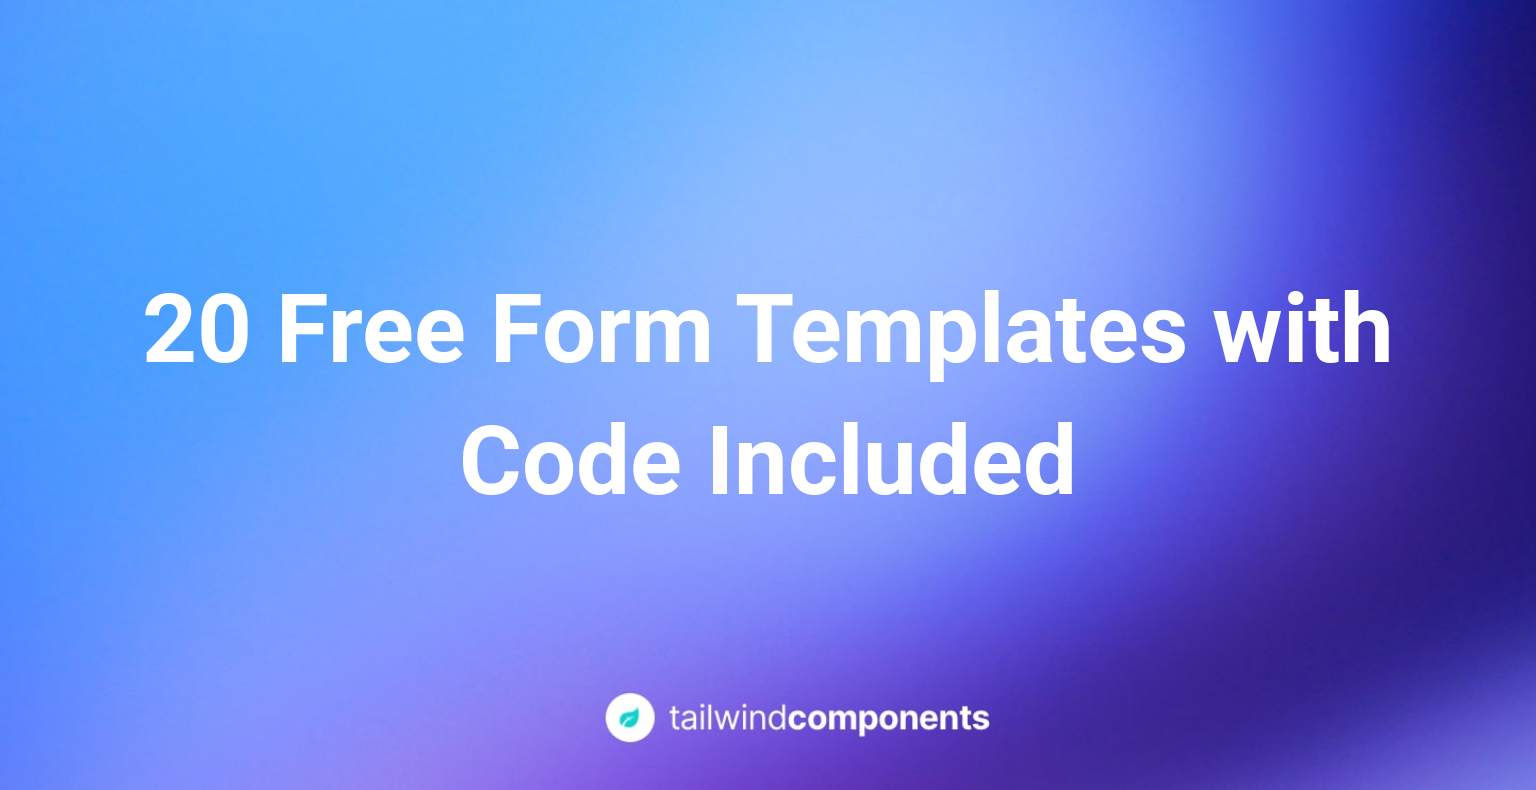 20 Free Form Templates with Code Included Image